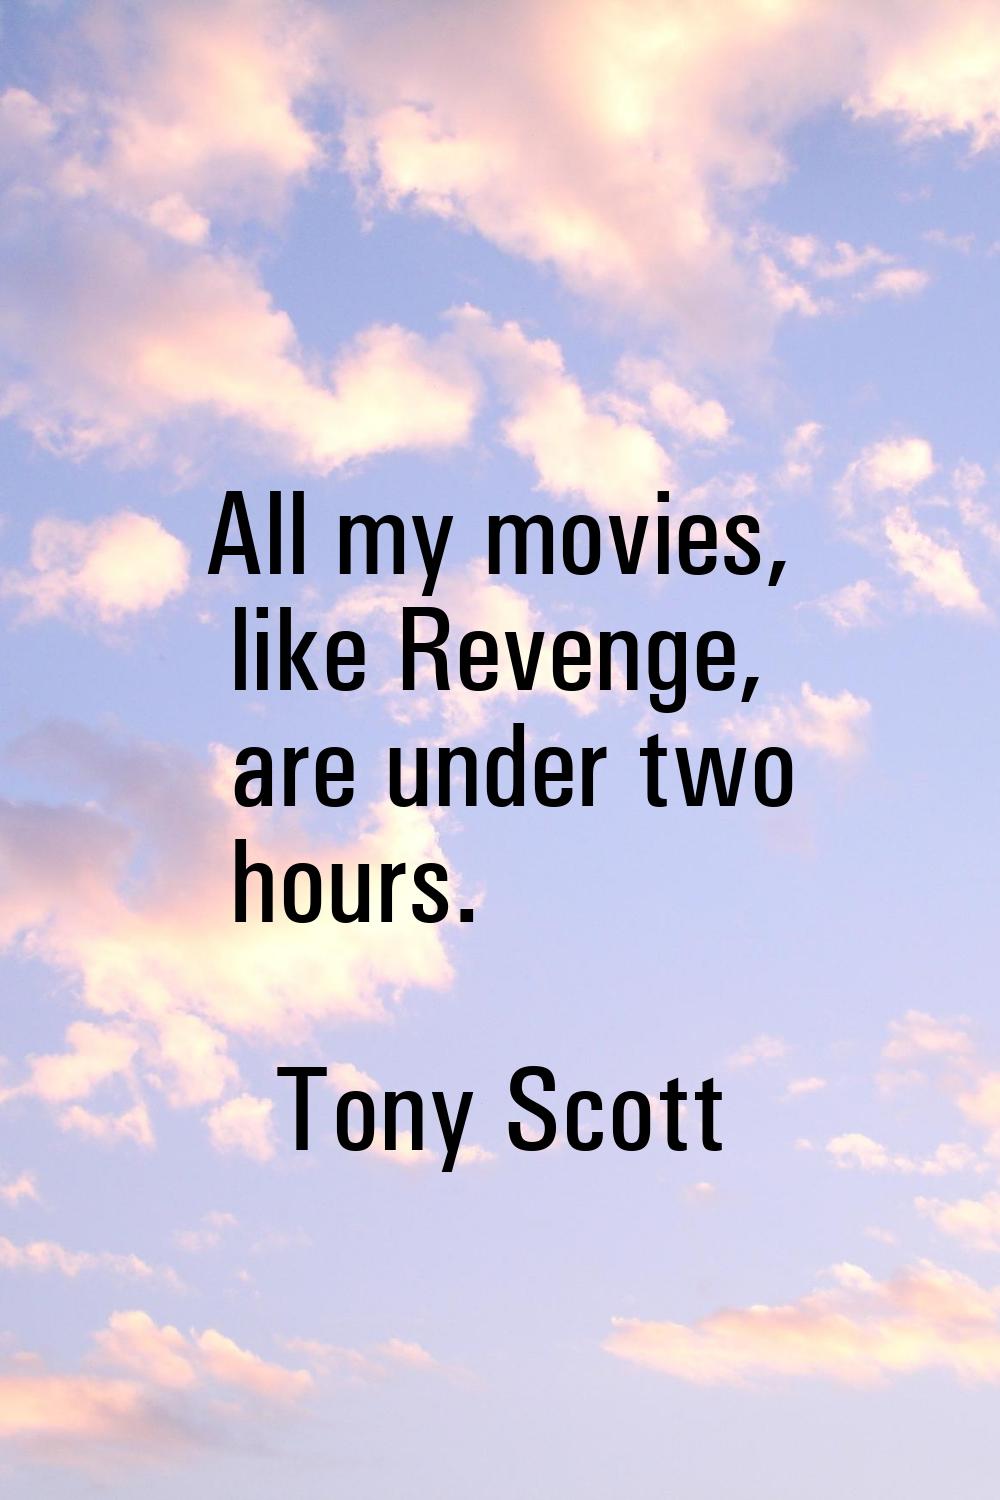 All my movies, like Revenge, are under two hours.